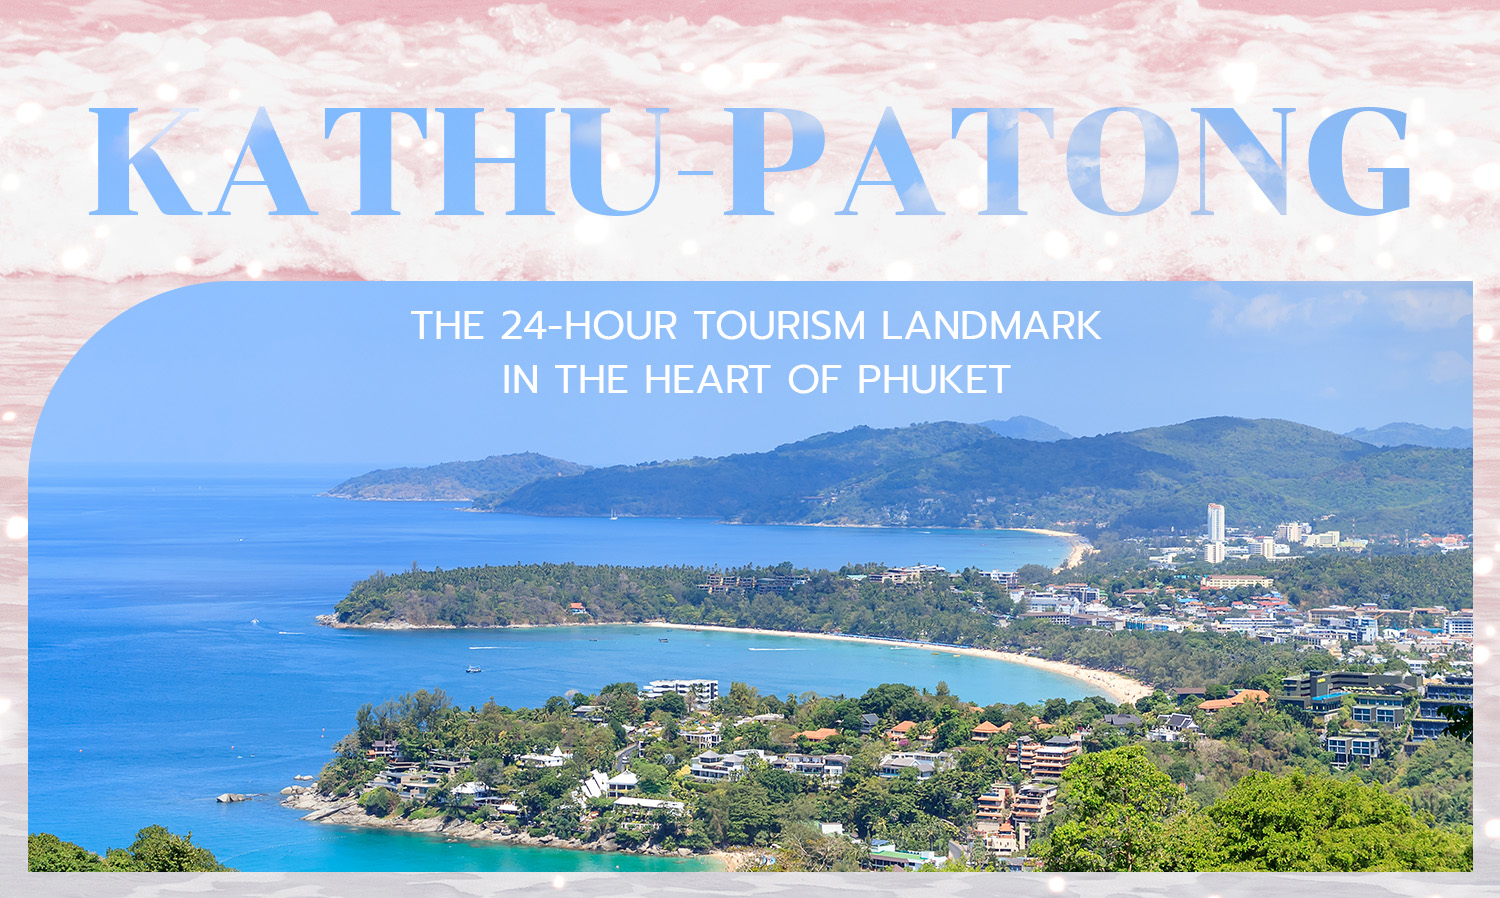 Kathu-Patong, the 24-hour tourism landmark in the heart of Phuket